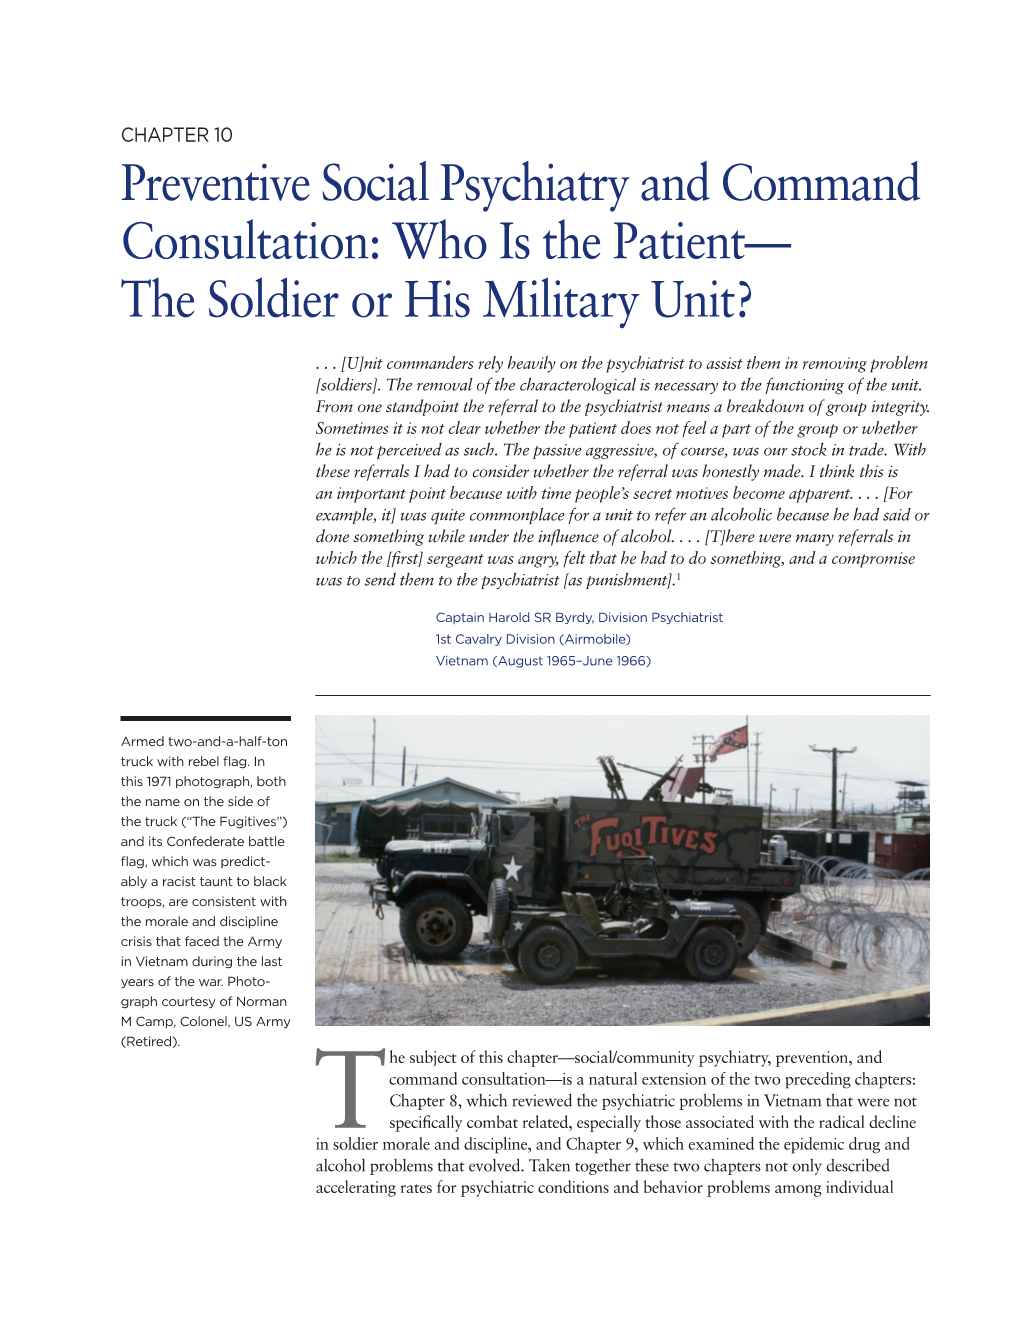 Preventive Social Psychiatry and Command Consultation: Who Is the Patient— the Soldier Or His Military Unit?